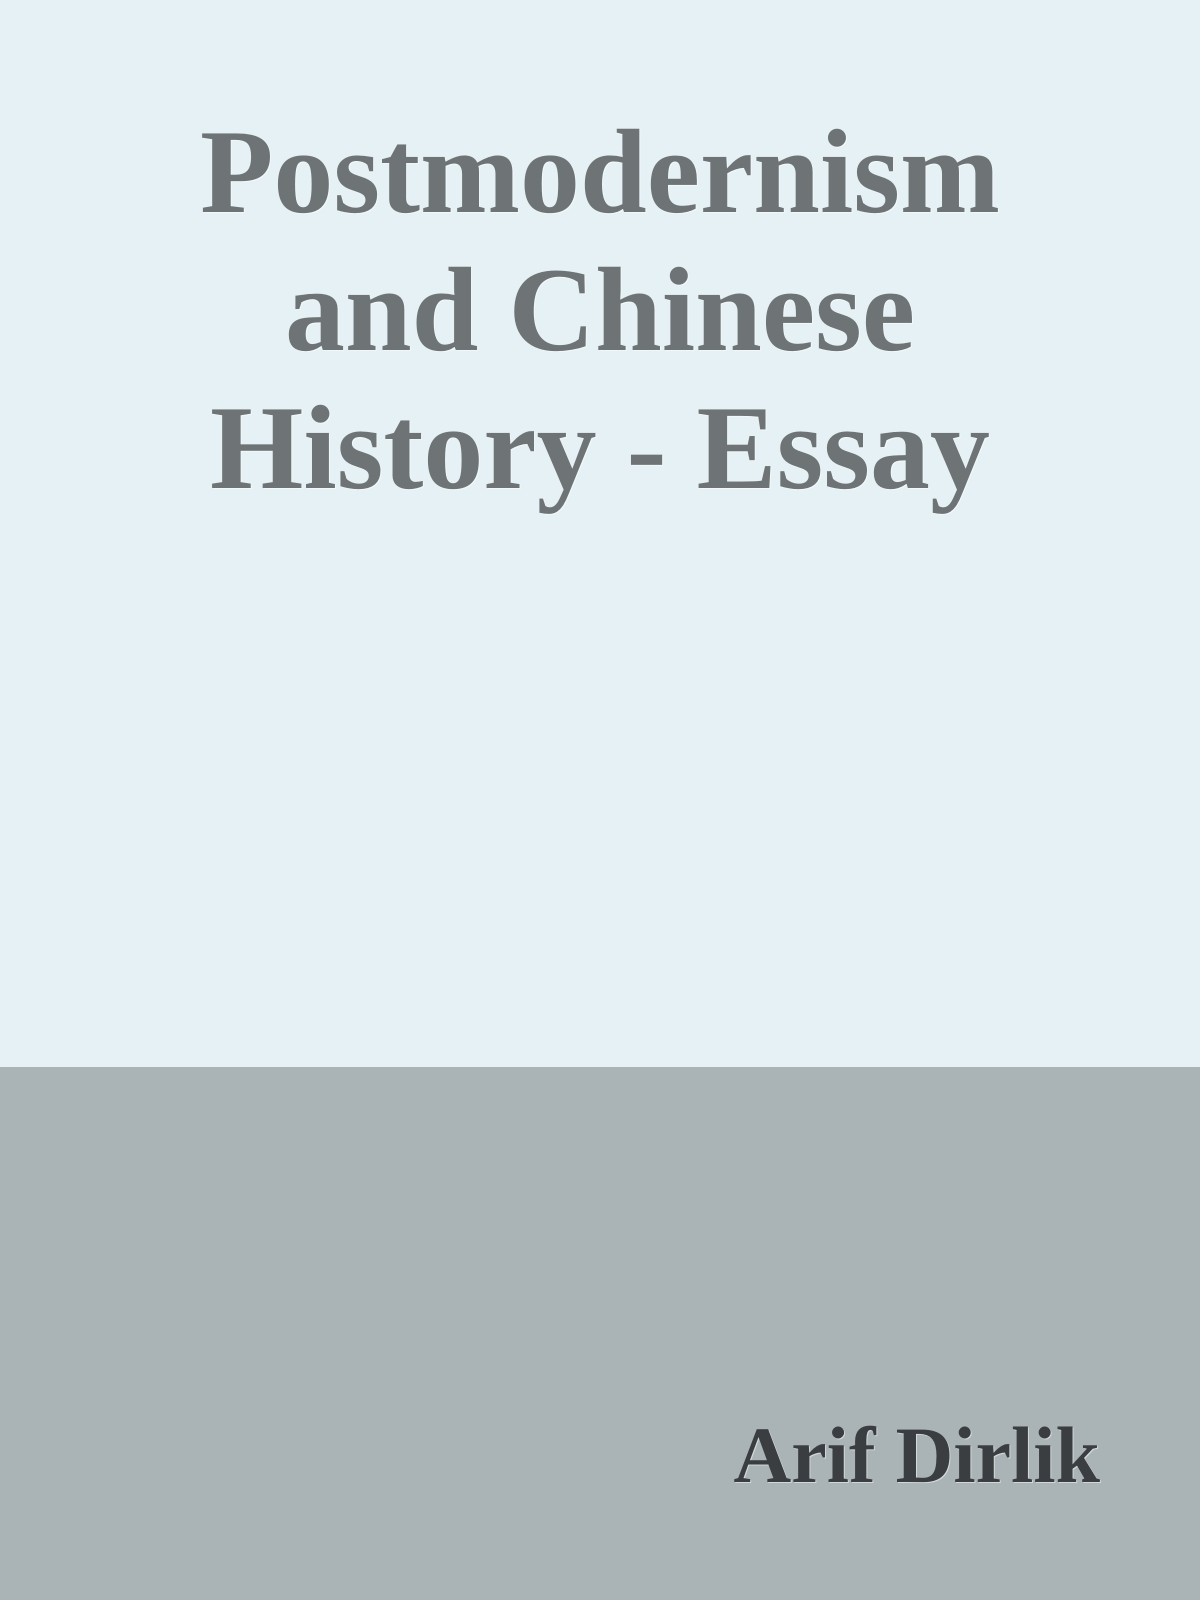 Postmodernism and Chinese History - Essay